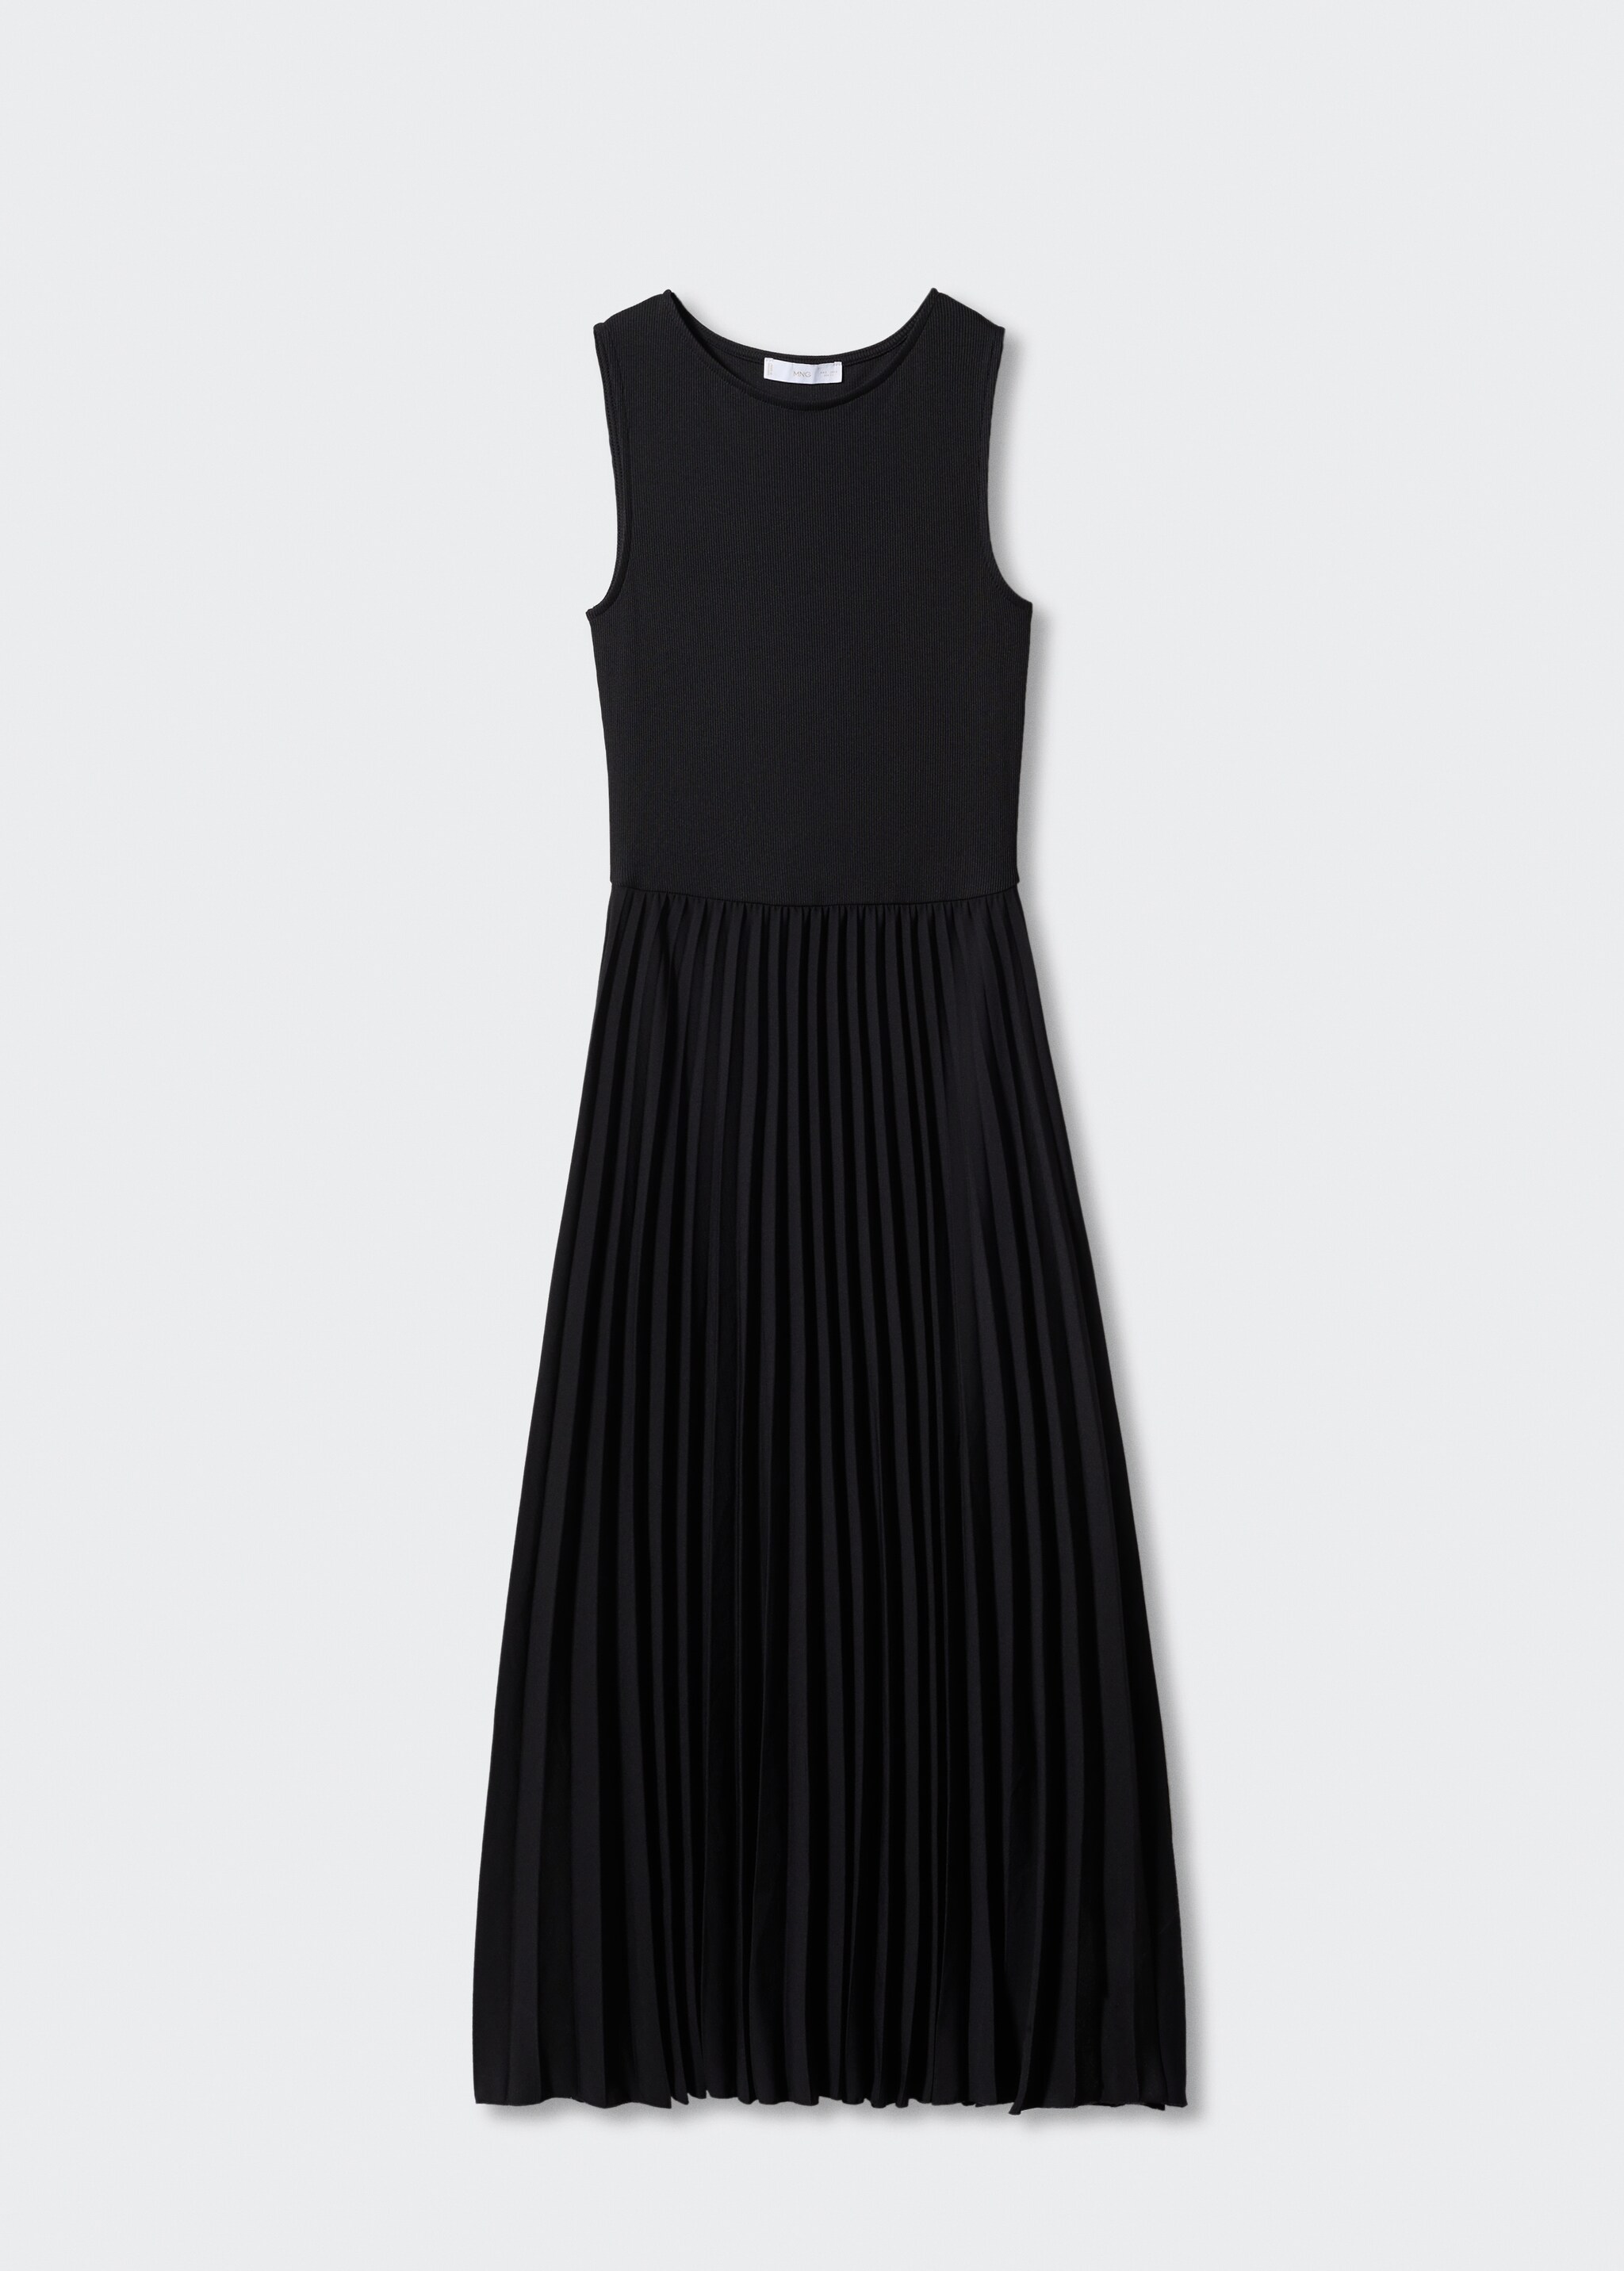 Pleated hem dress - Article without model